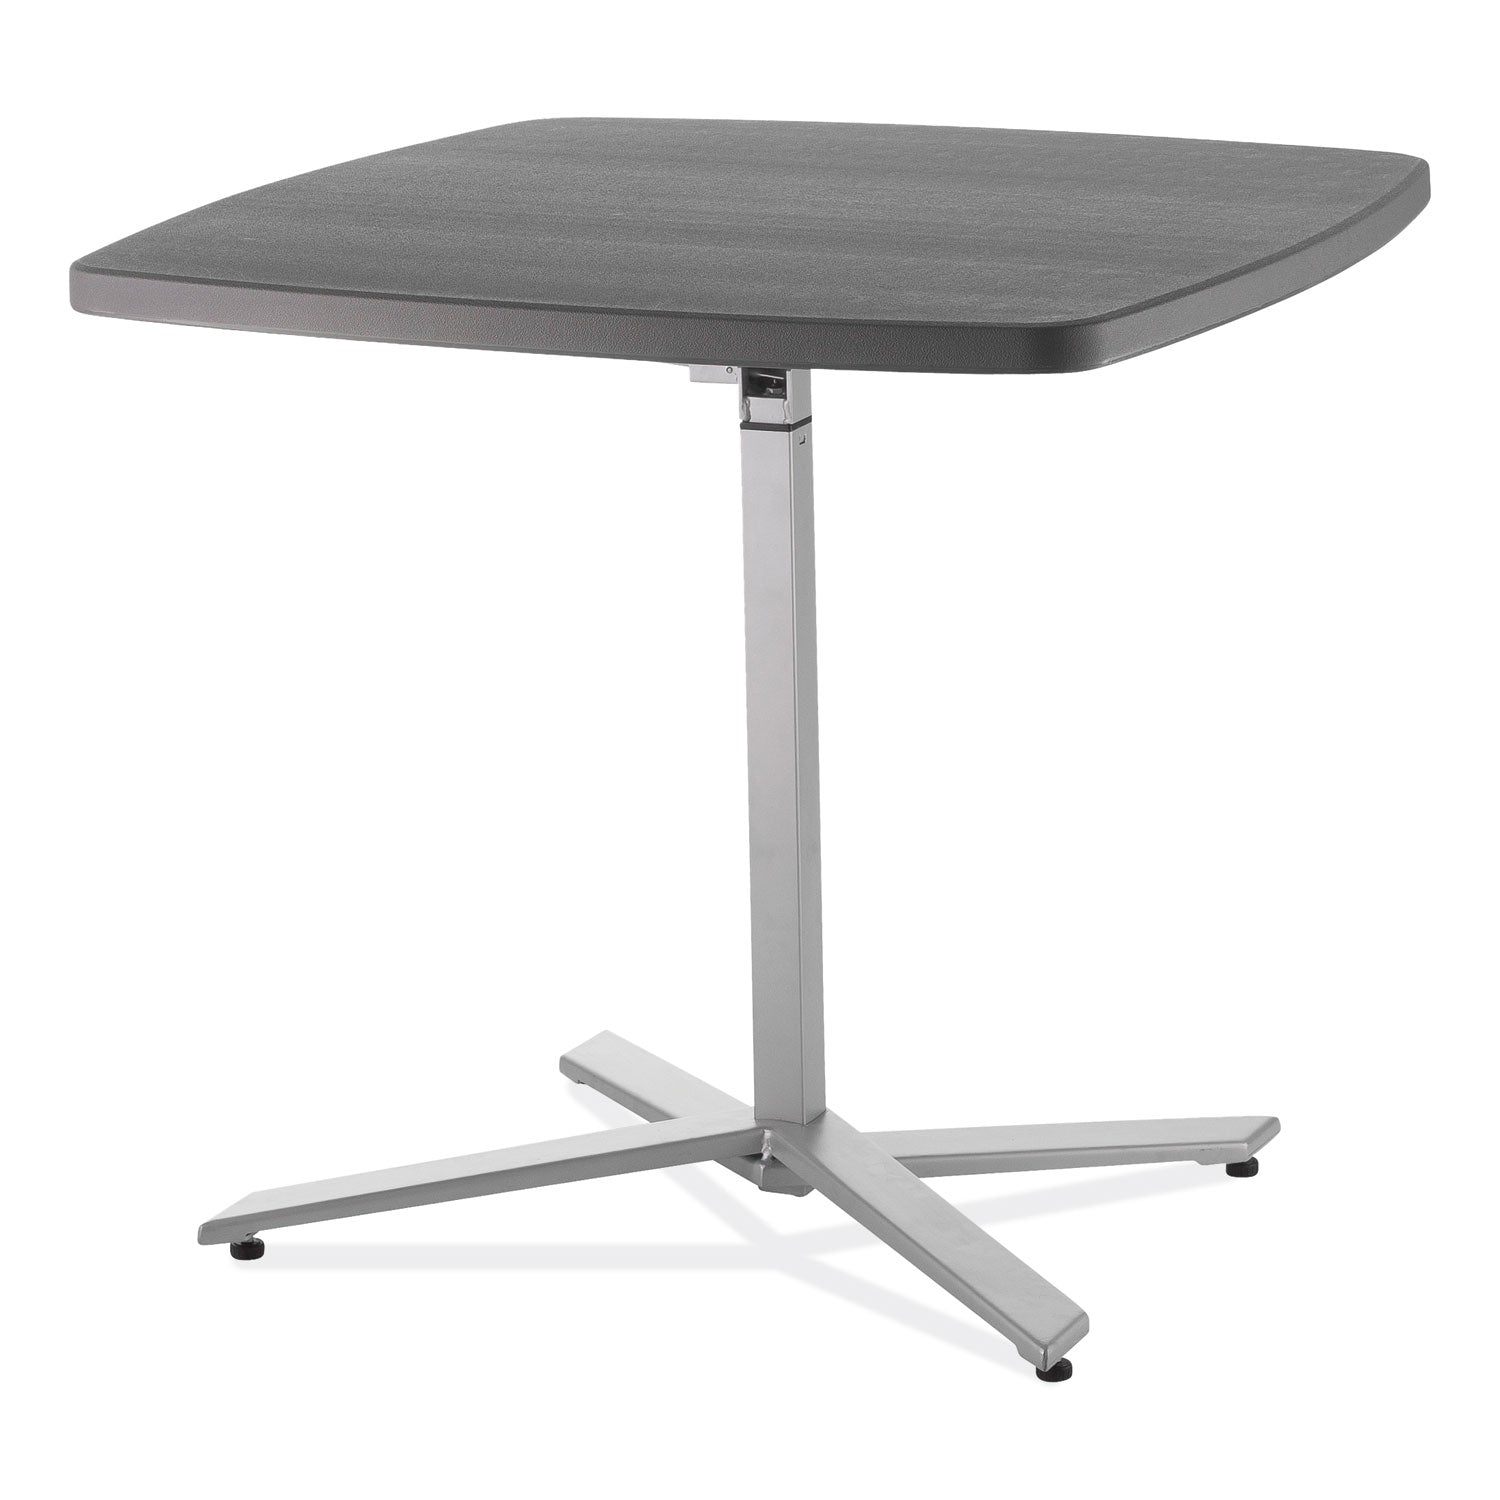 cafe-time-adjustable-height-table-square-36w-x-36d-x-30-to-42h-charcoal-slate-ships-in-1-3-business-days_npsctt3042 - 1